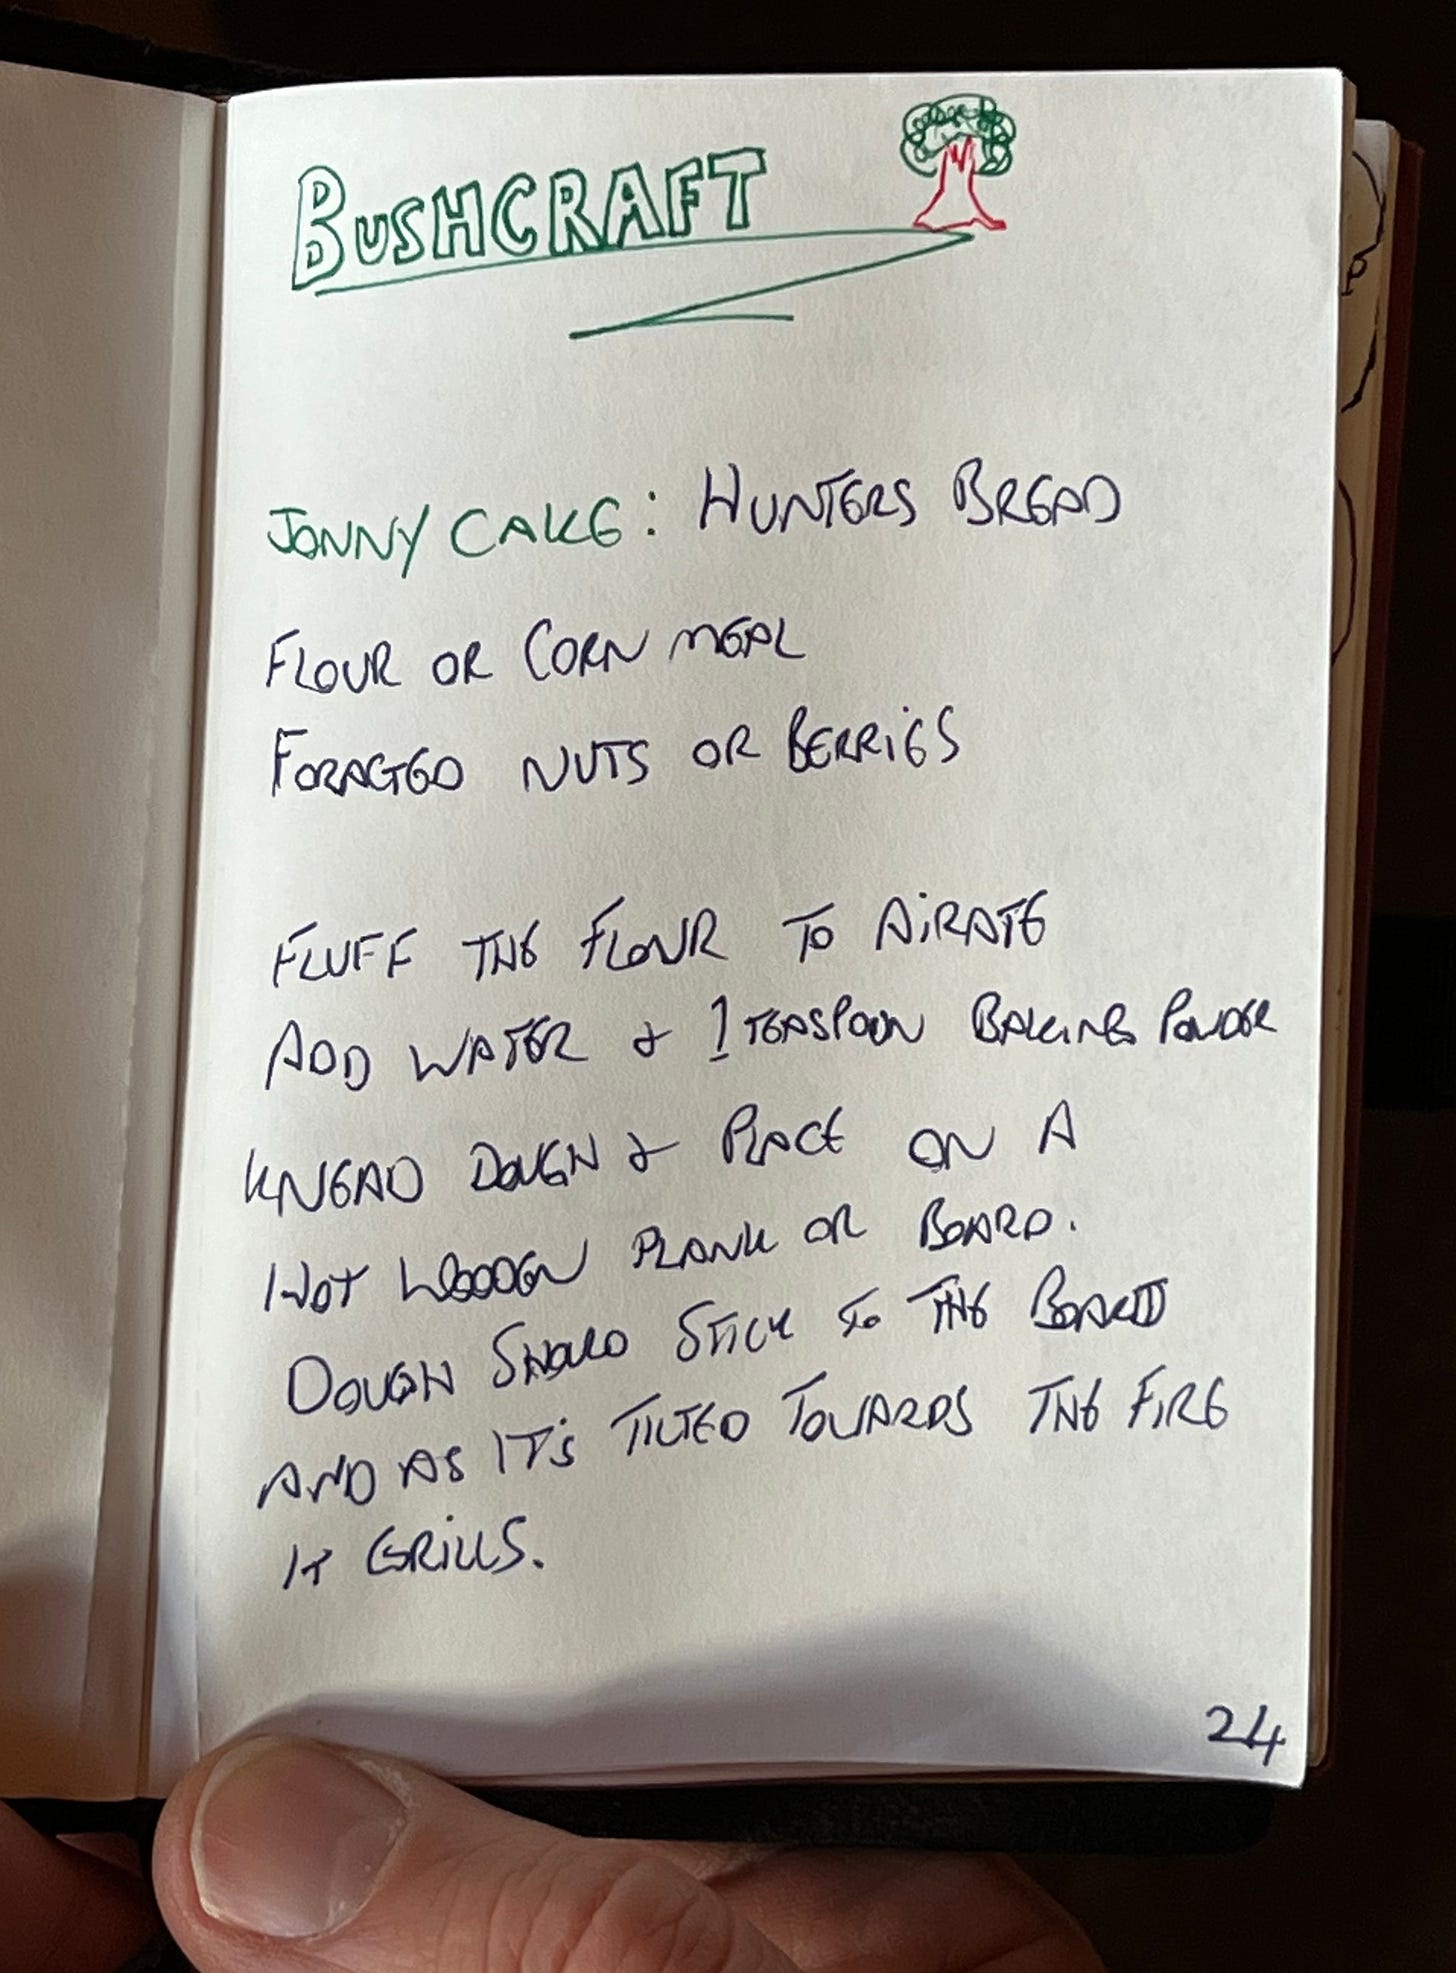 A page in an open journal reads. Jonny cake: Hunters Bread Flour or corn meal Foraged nuts or berries  Fluff the flour to aerate, add water & one teaspoon baking powder Knead dough and place on a hot wooden plank or board Dough should stick to the board and as it is tilted towards the fire it grills